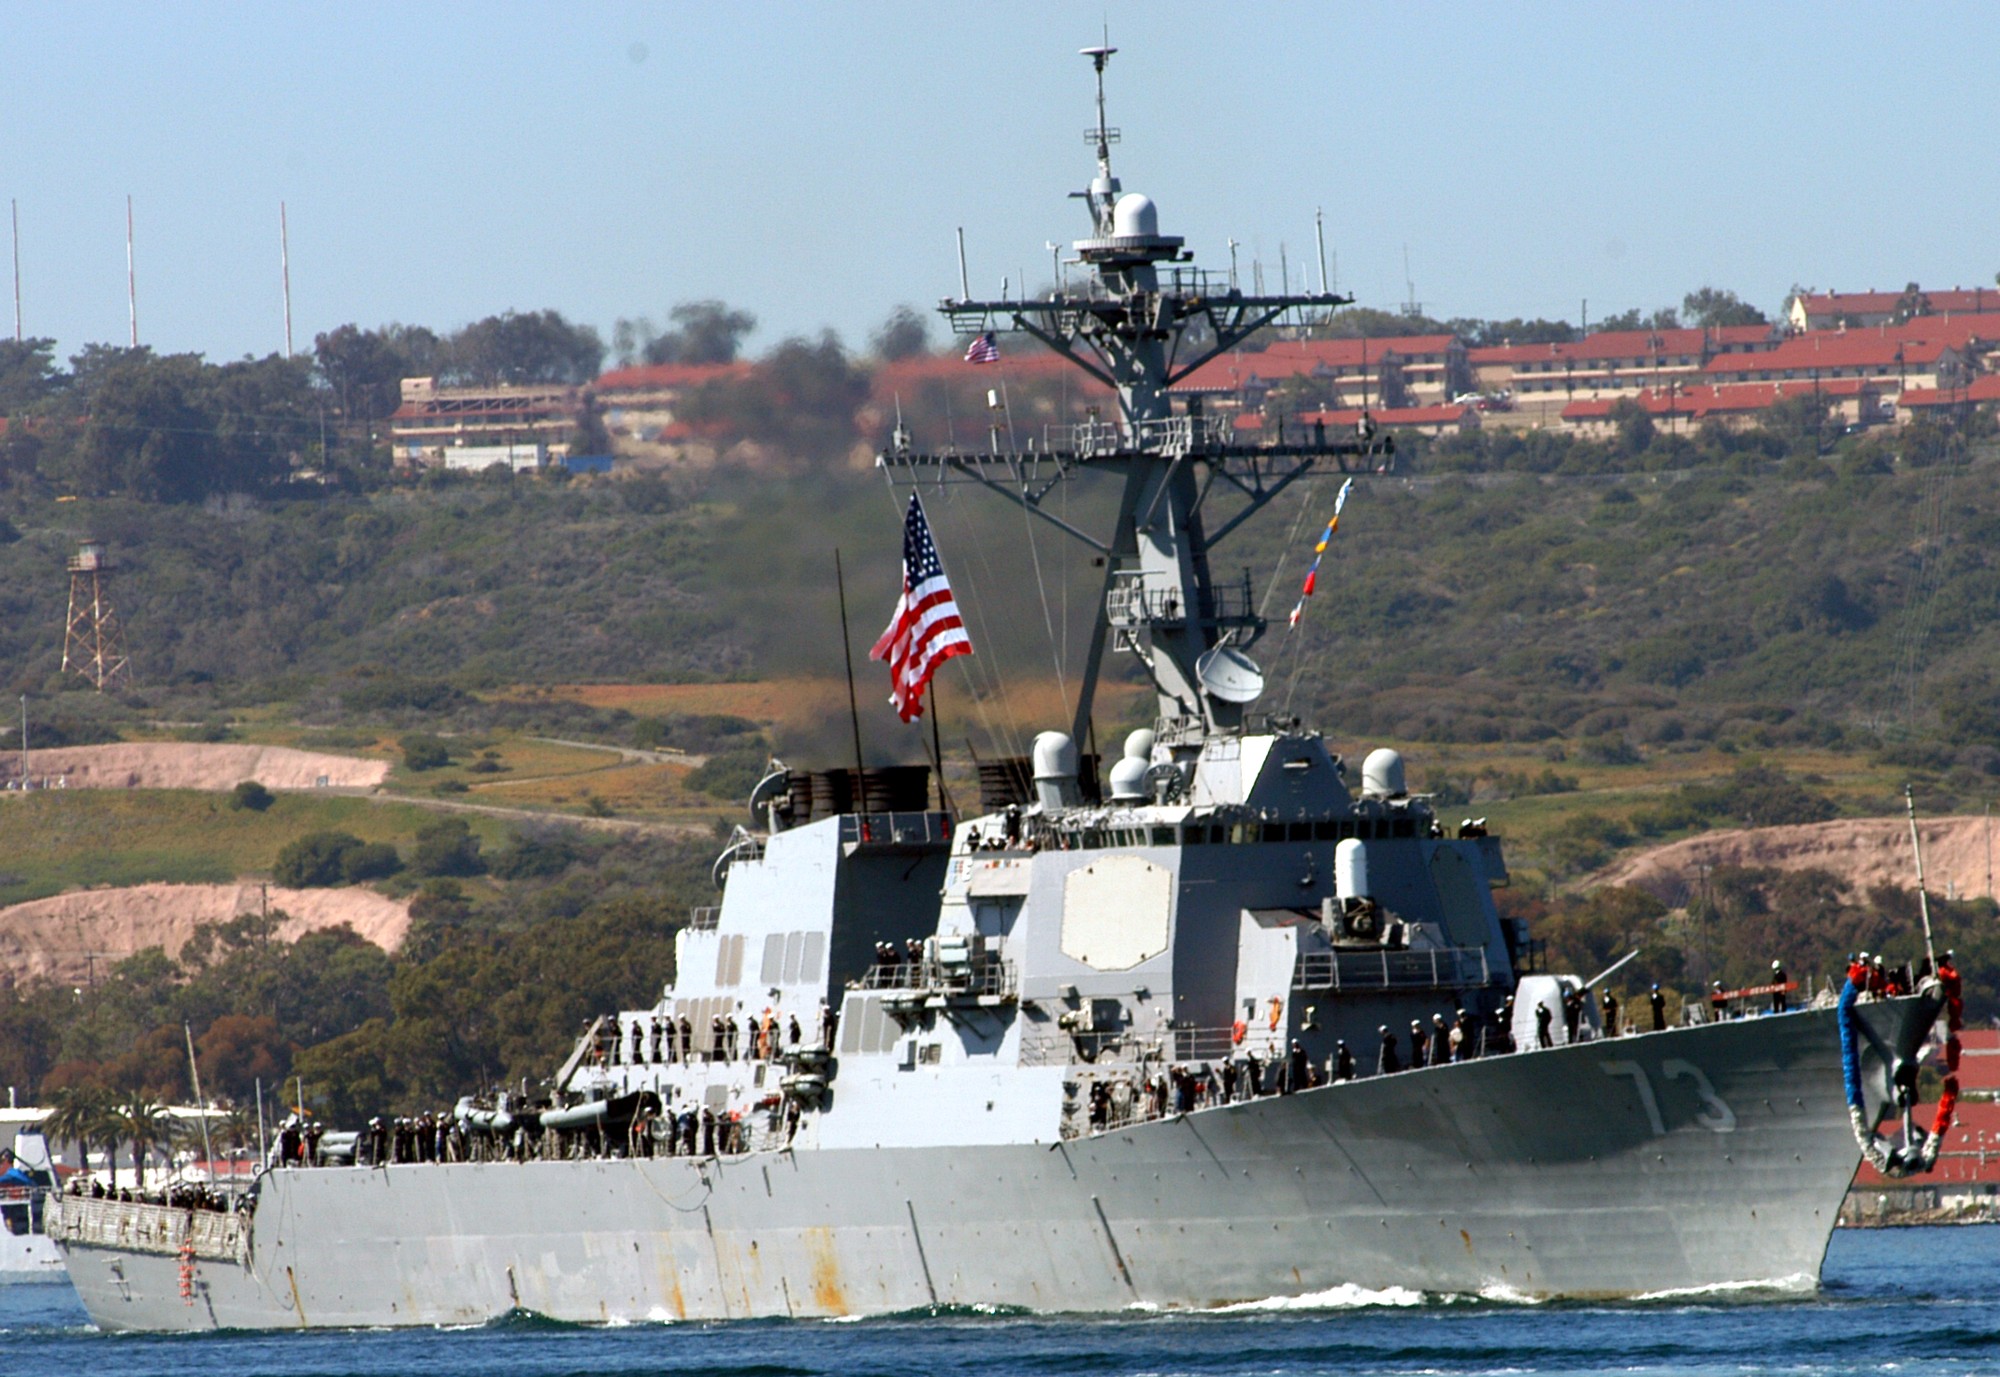 ddg-73 uss decatur guided missile destroyer arleigh burke class aegis bmd 43